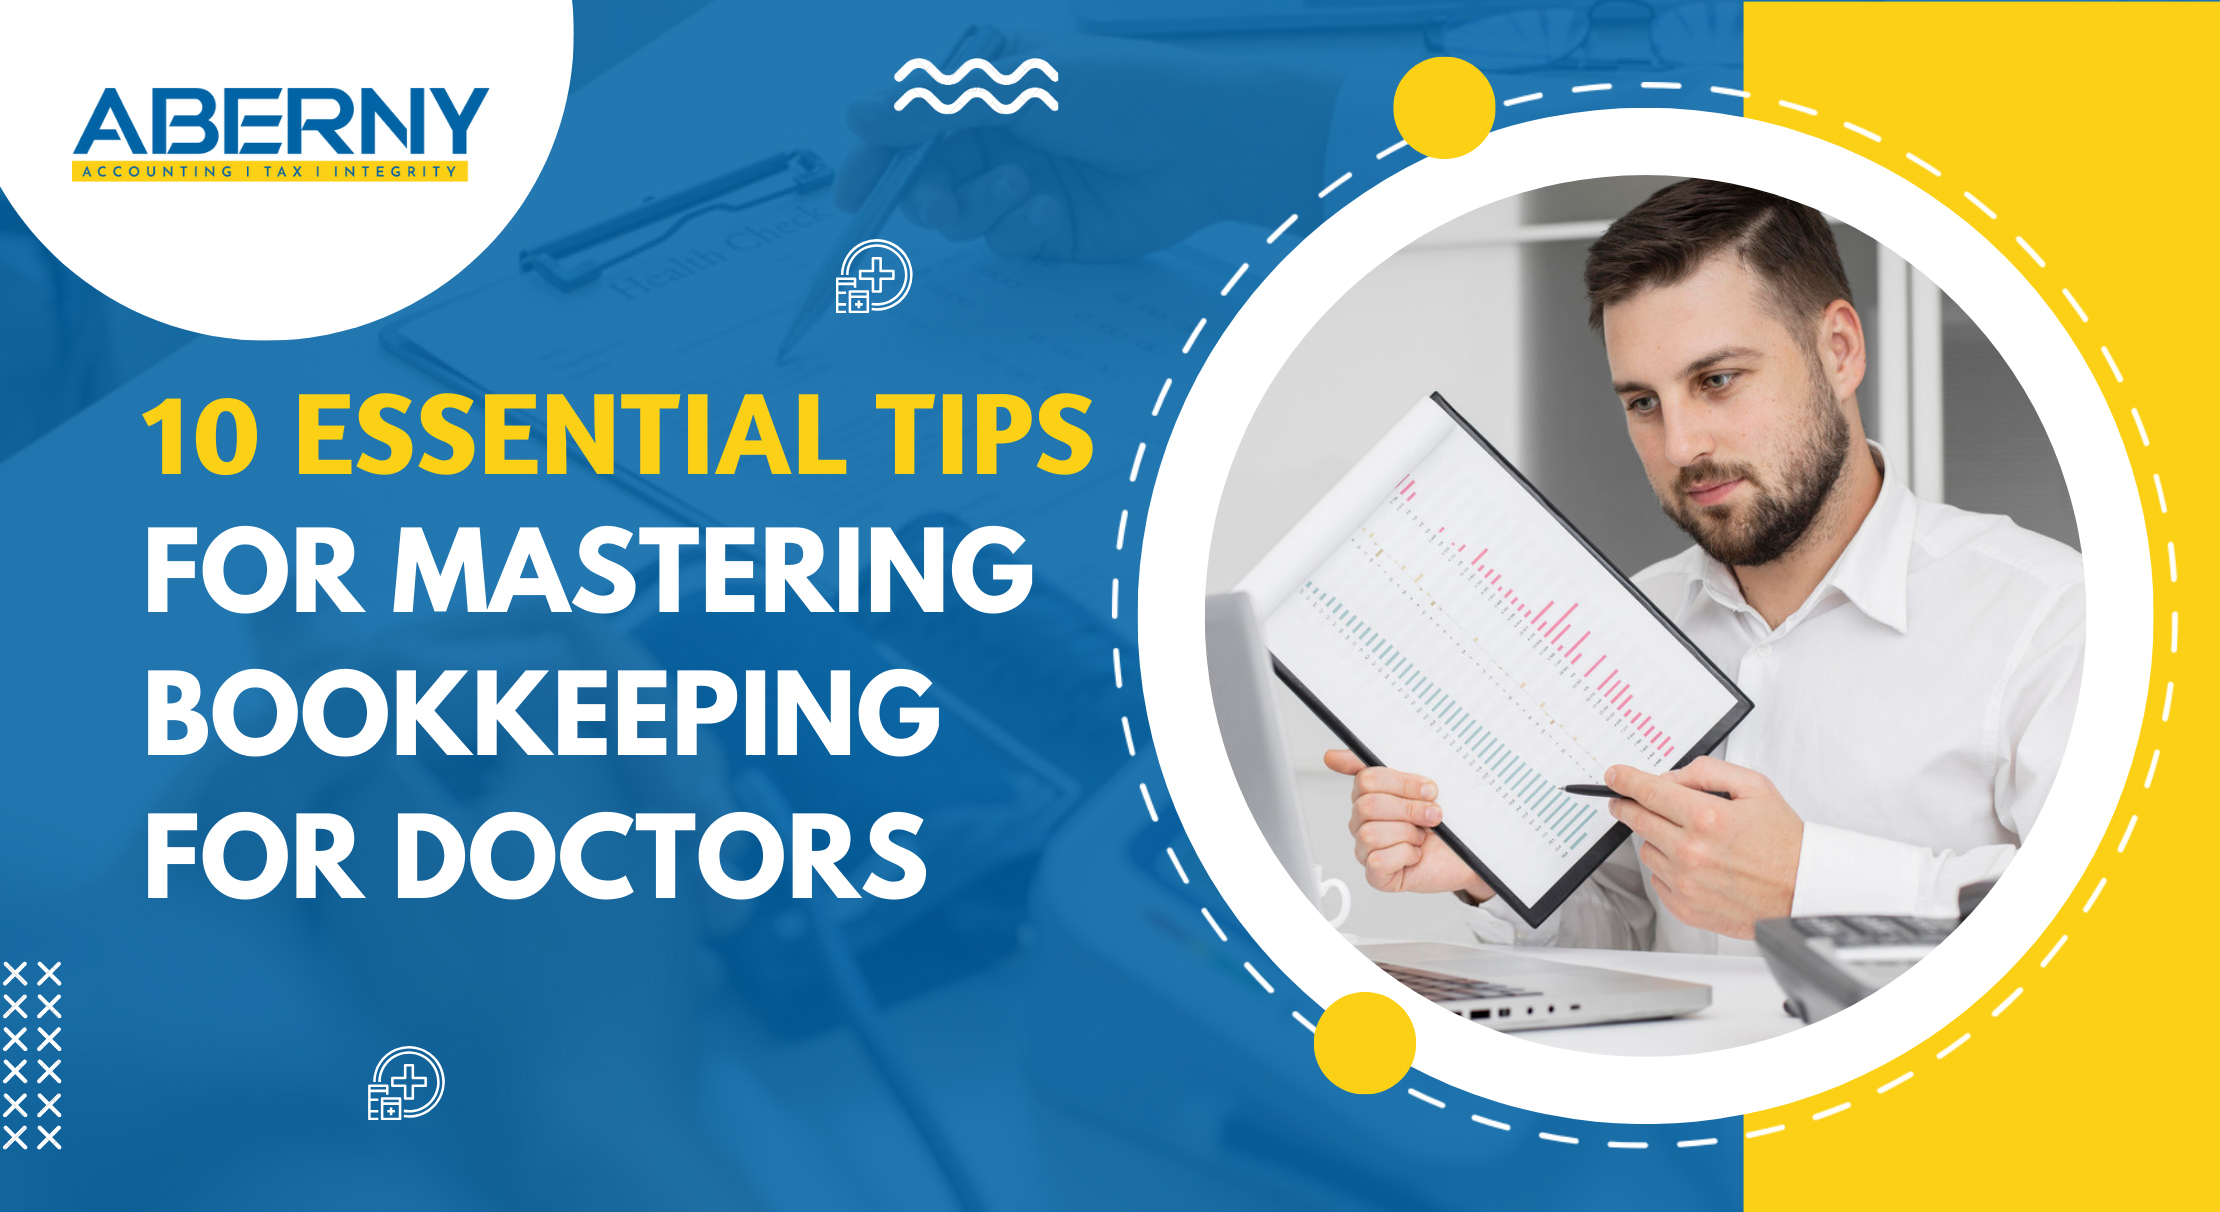 10-essential-tips-for-mastering-bookkeeping-for-doctors